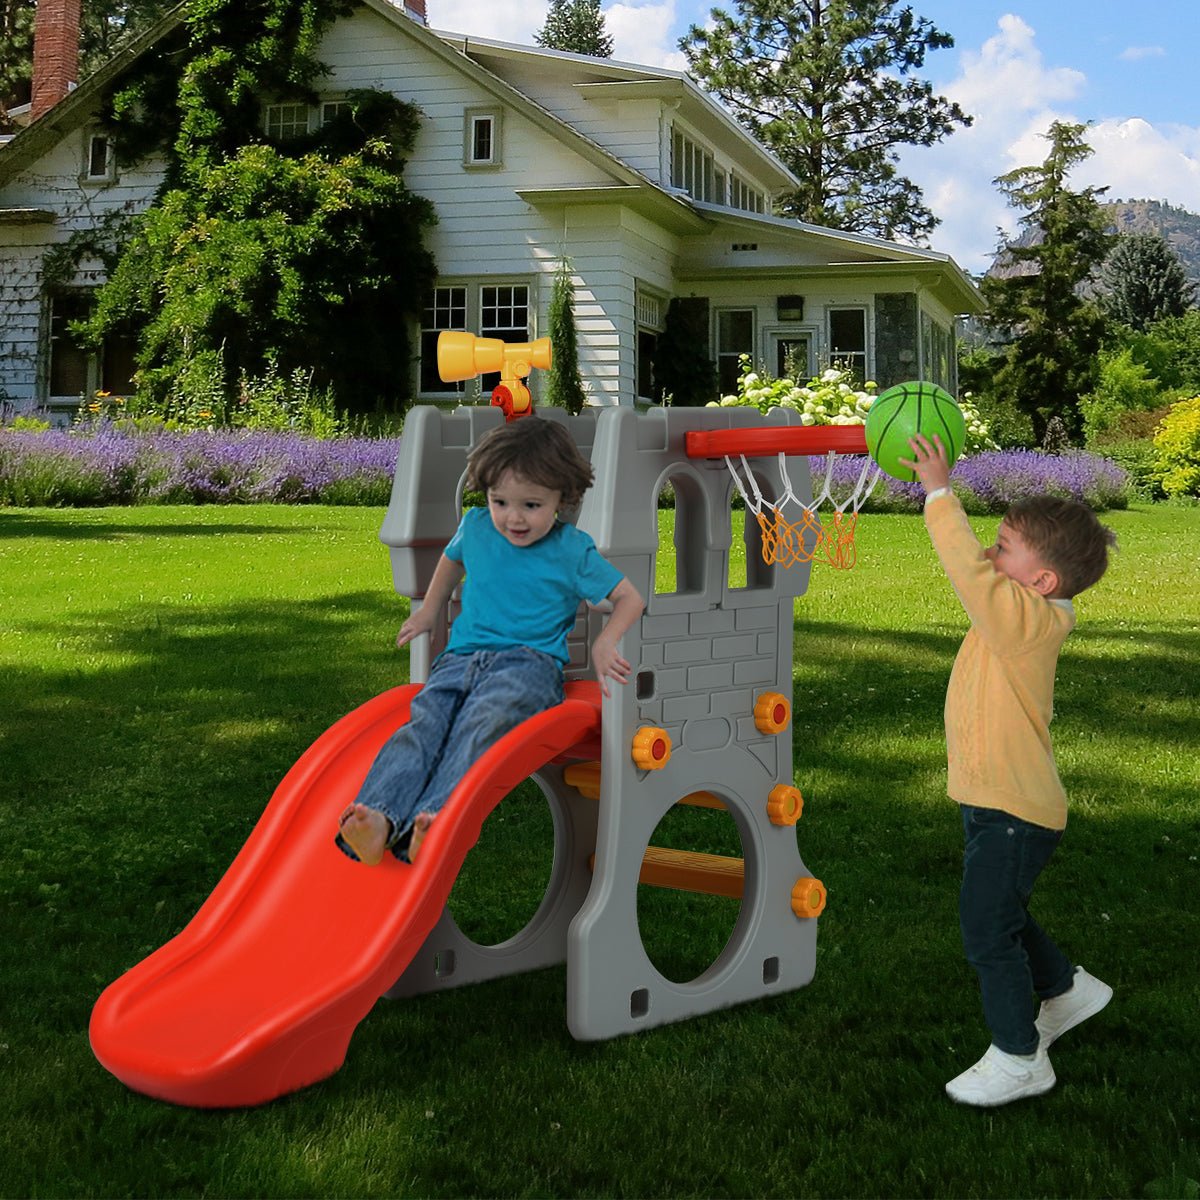 Kids Climber Slide Set - Active Play with Basketball Hoop for Fun